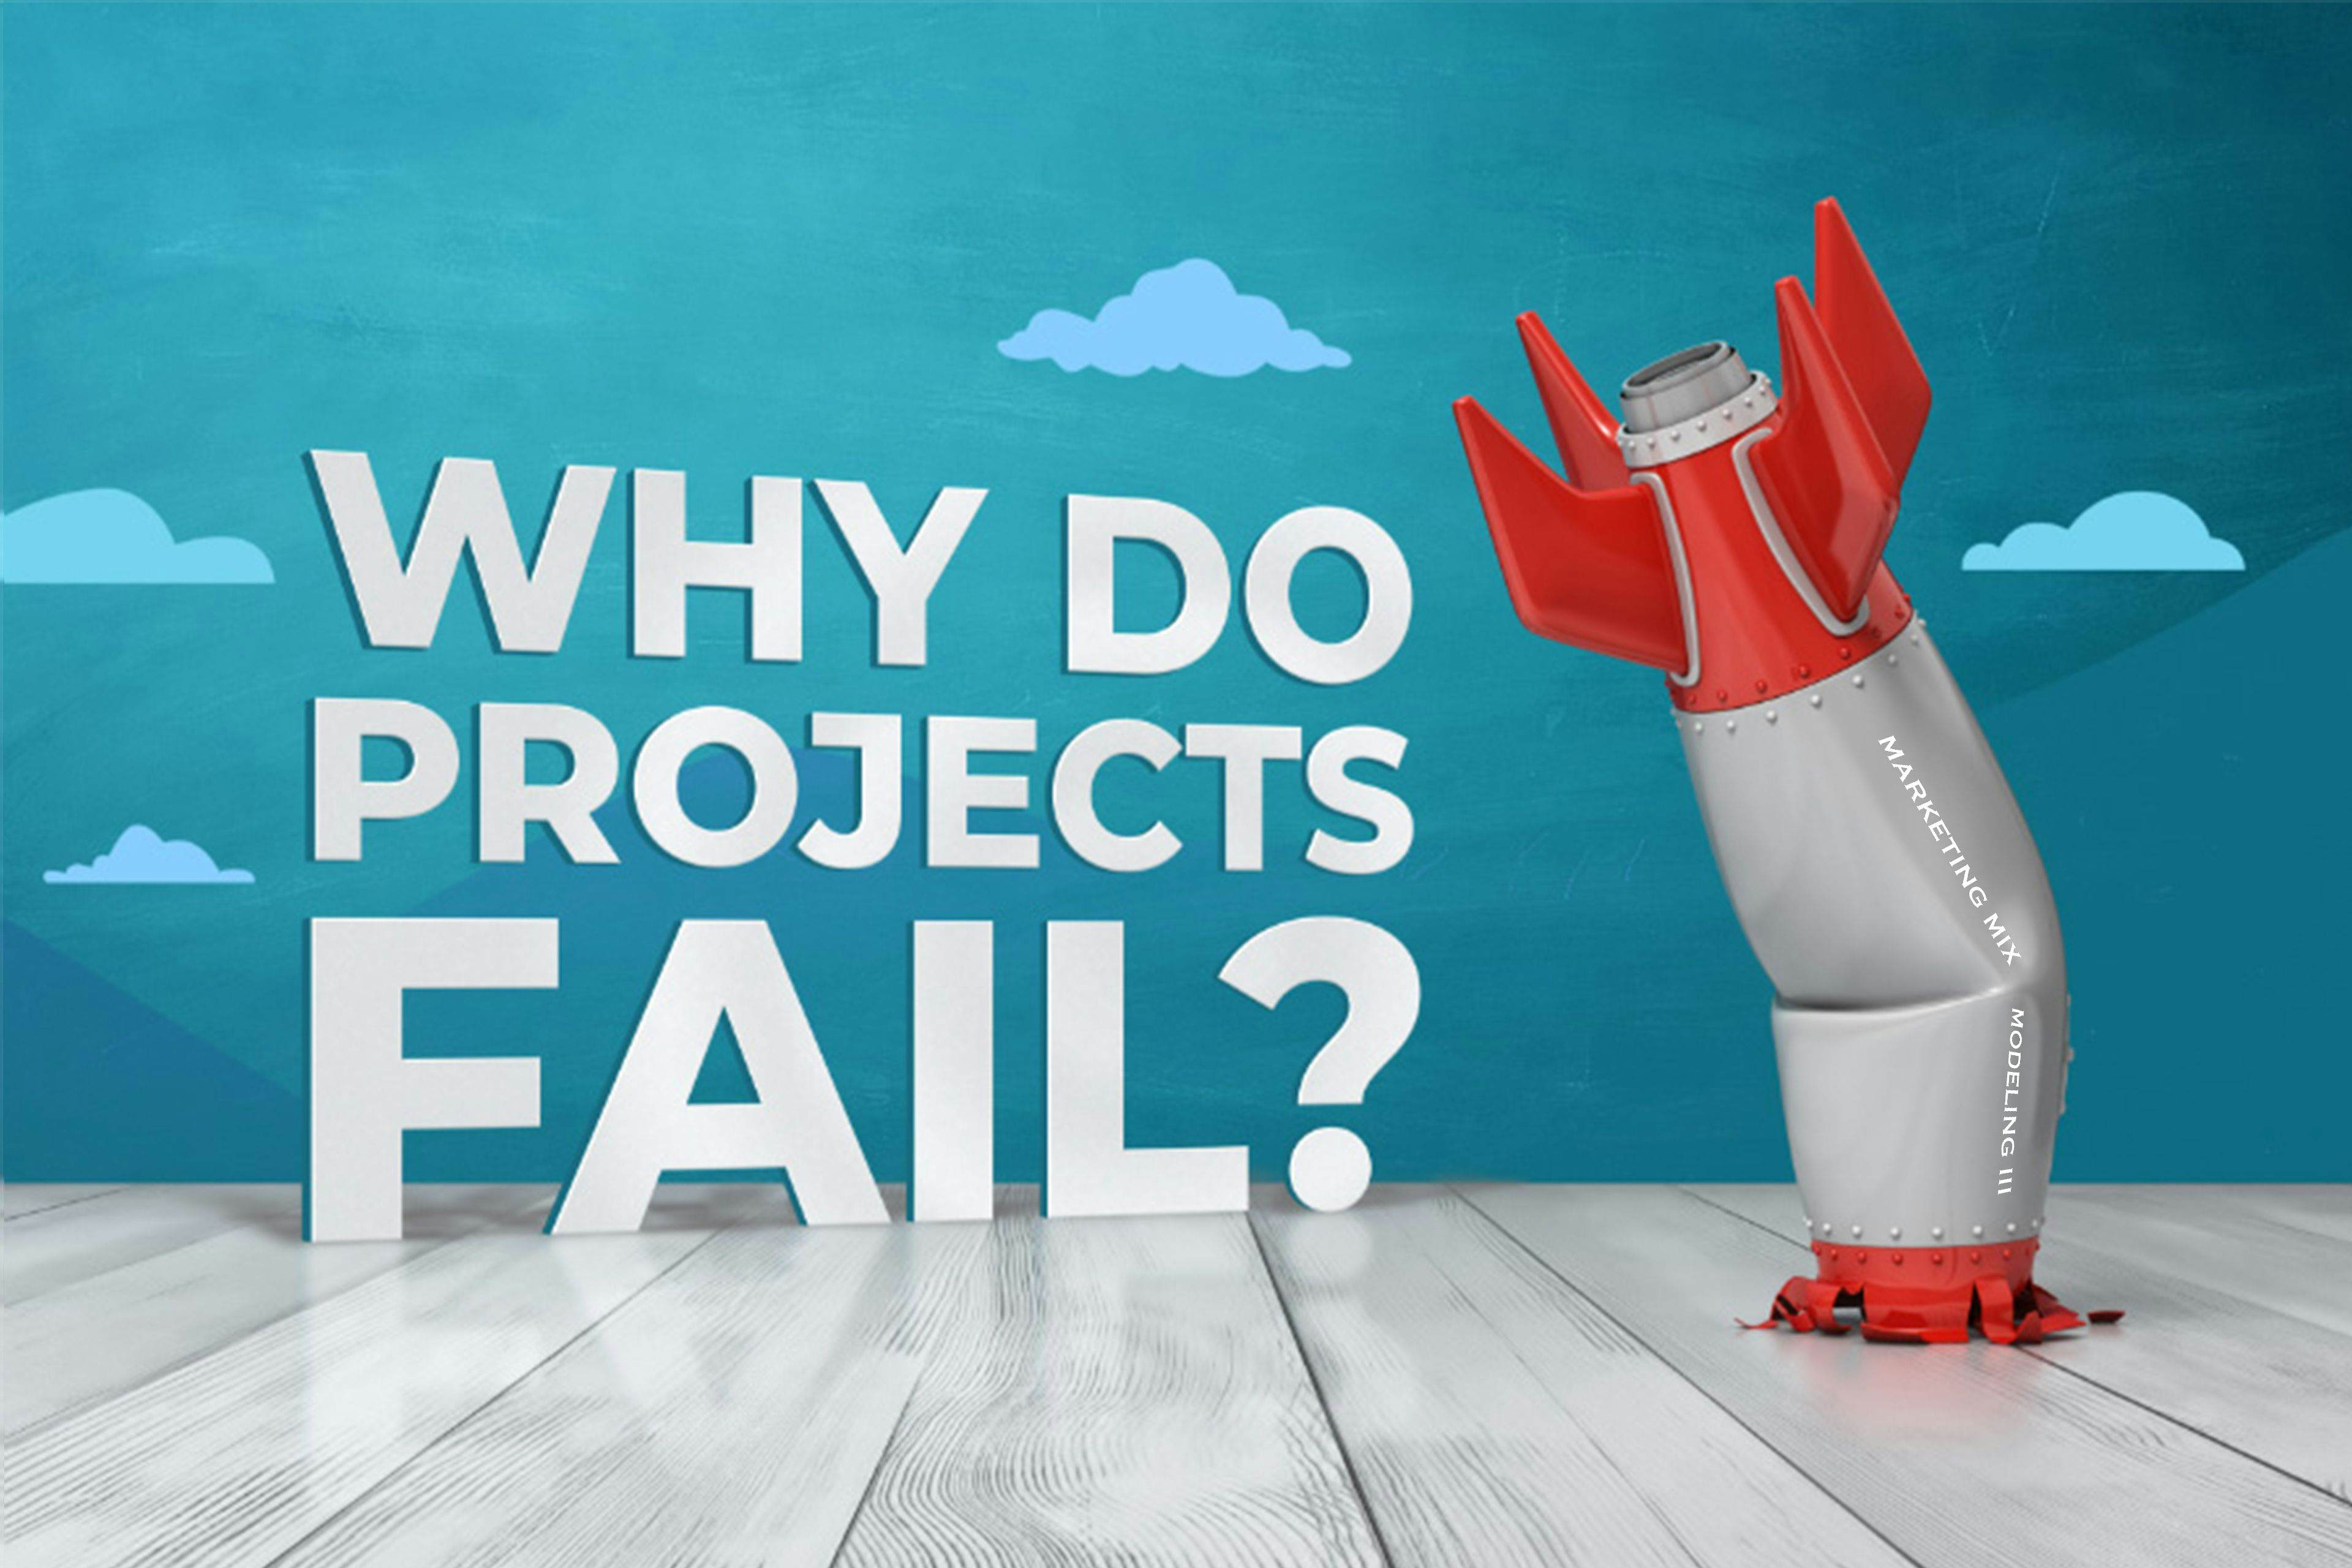 Article about Why Marketing Mix Modeling projects fail